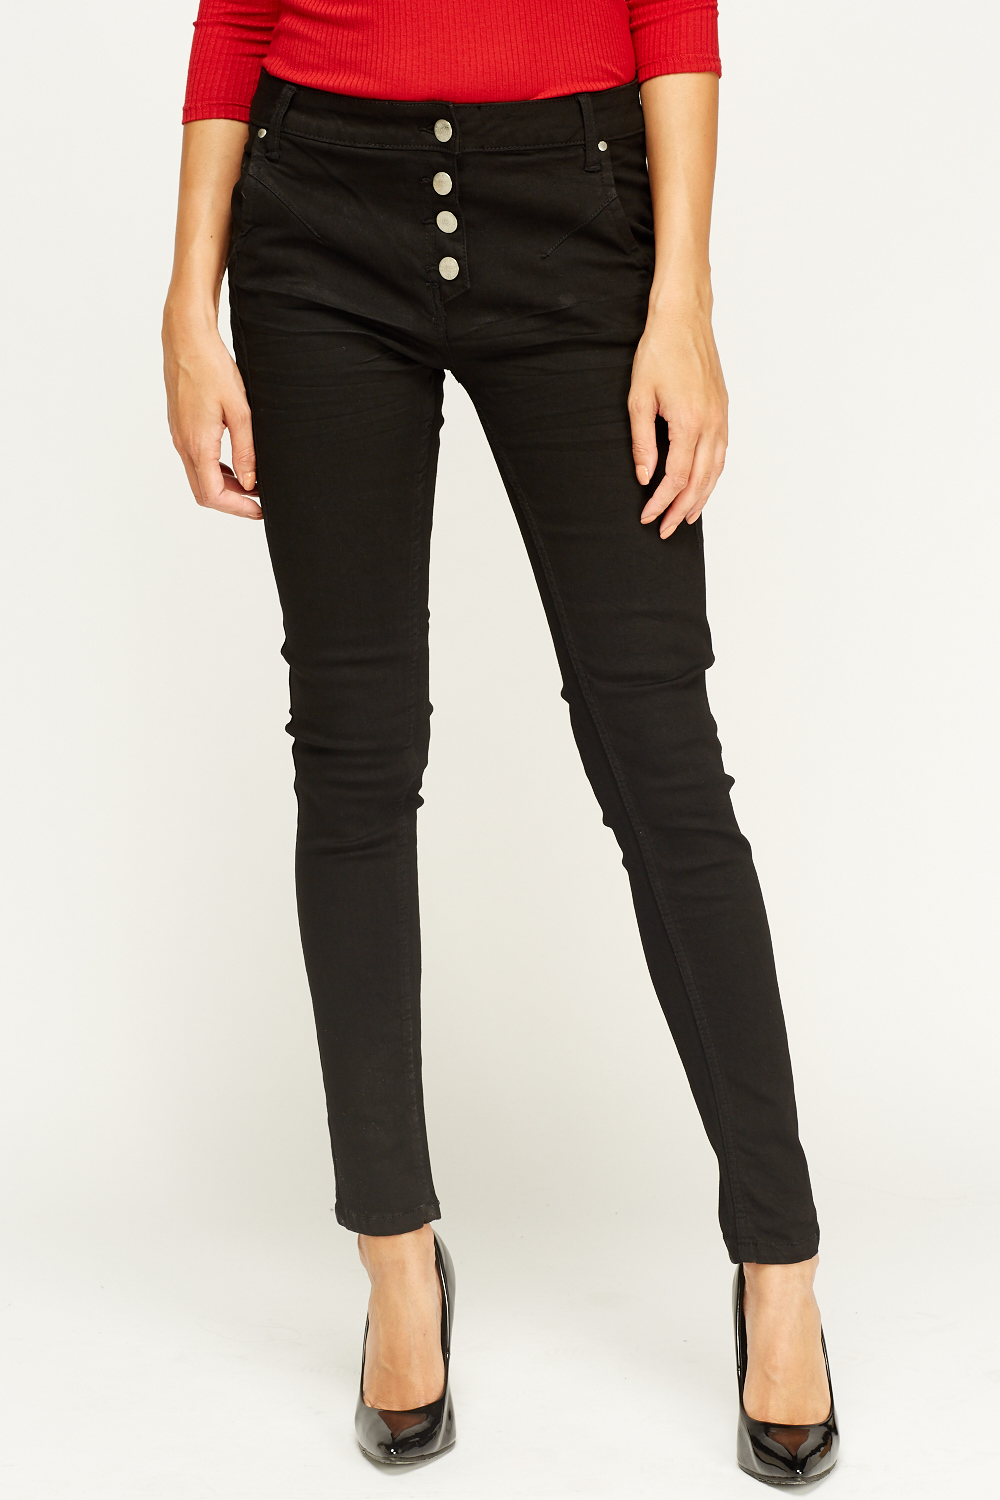 Button Up Black Jeans - Just $7